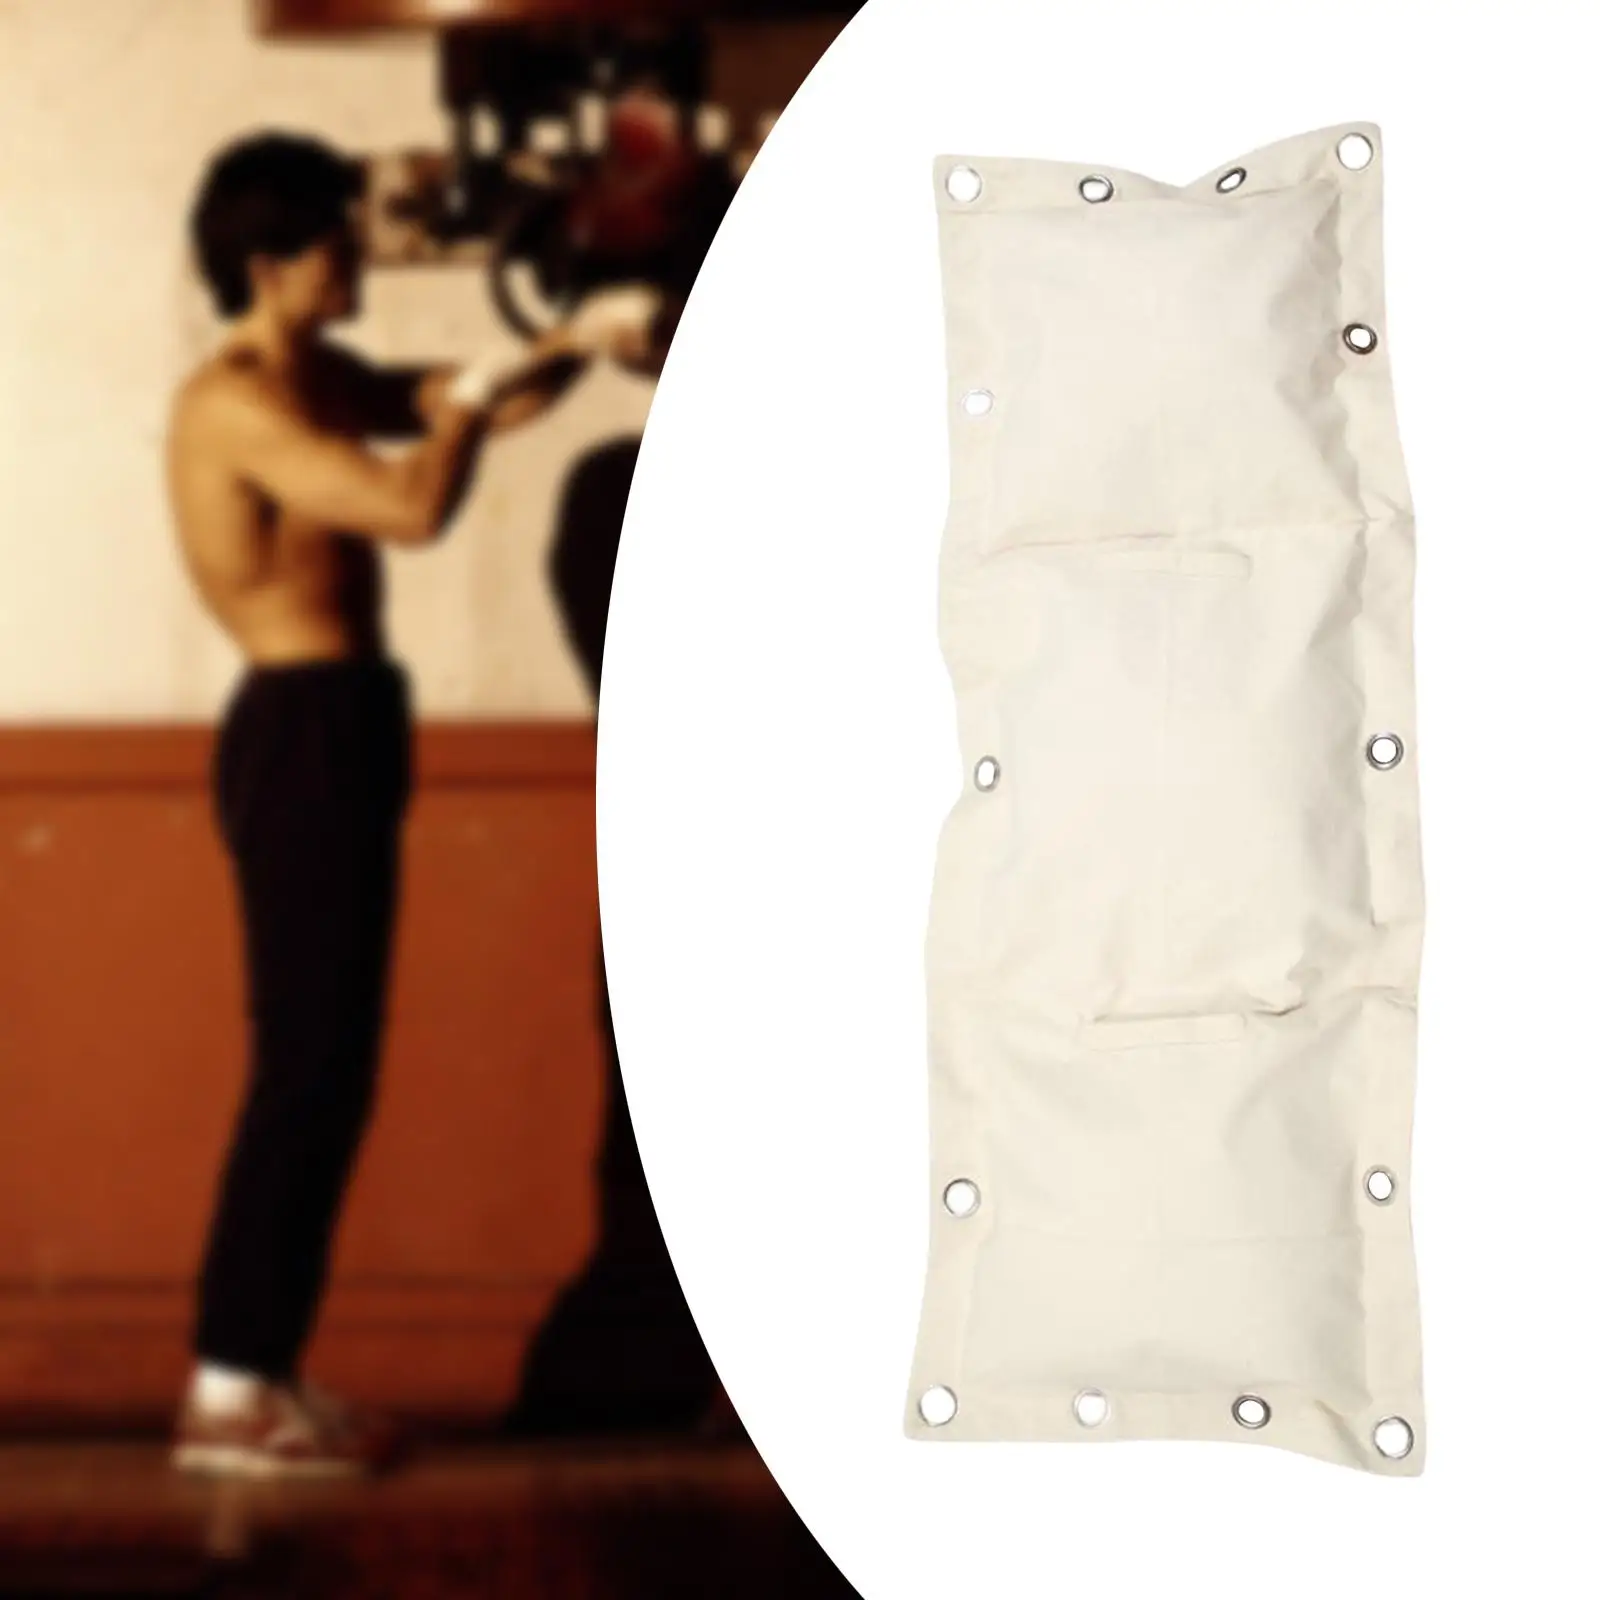 Wall Sandbag Empty Wall Mounted Canvas Fore Arm Workouts Martial Canvas Wall Bags Target Training 3 Section Punch Sand Bag